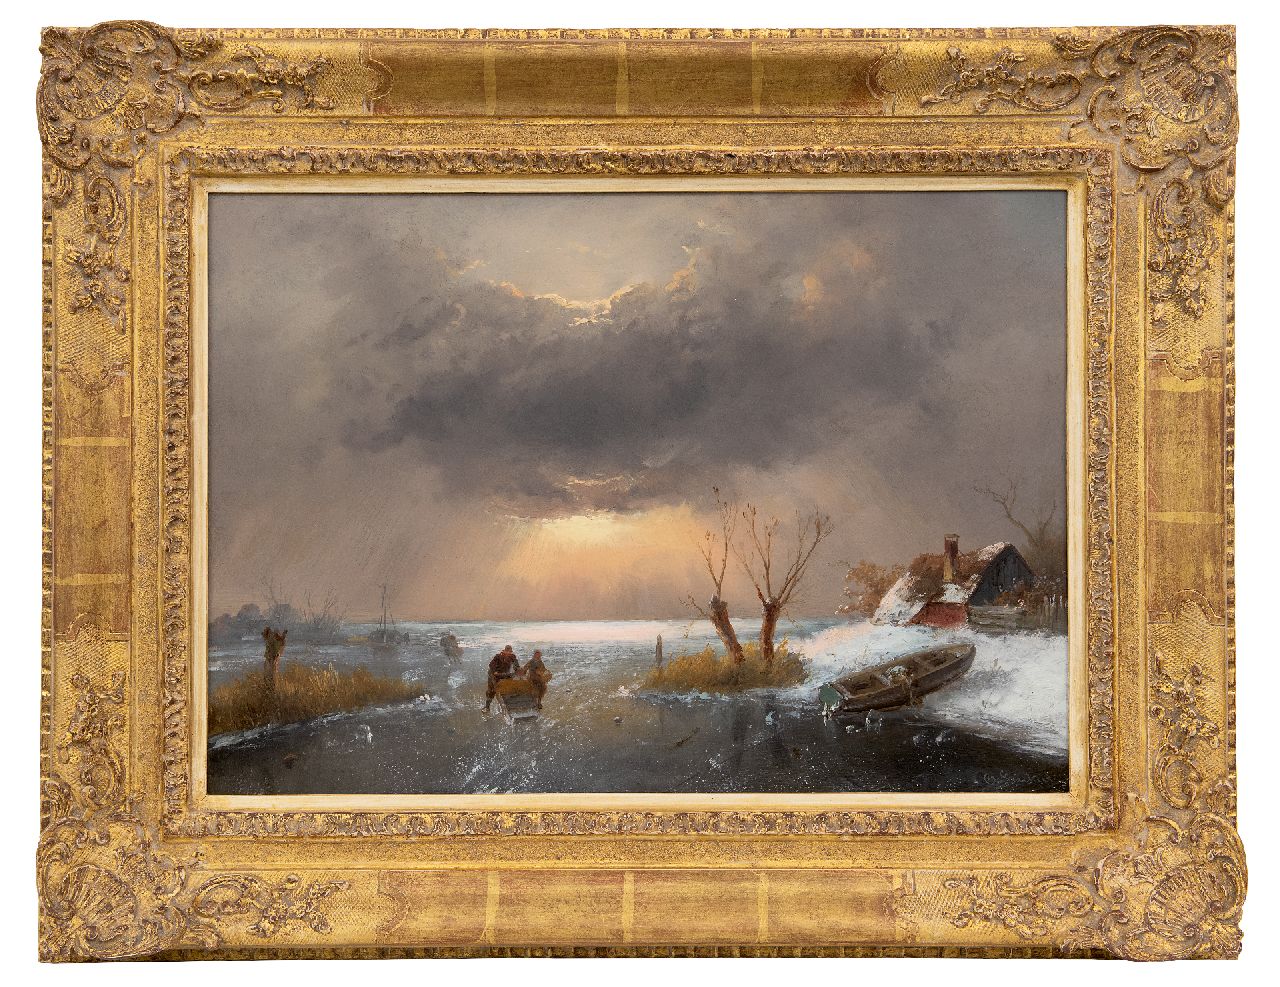 Leickert C.H.J.  | 'Charles' Henri Joseph Leickert | Paintings offered for sale | Dutch winter with skaters at sunset, oil on panel 33.8 x 48.2 cm, signed l.r.